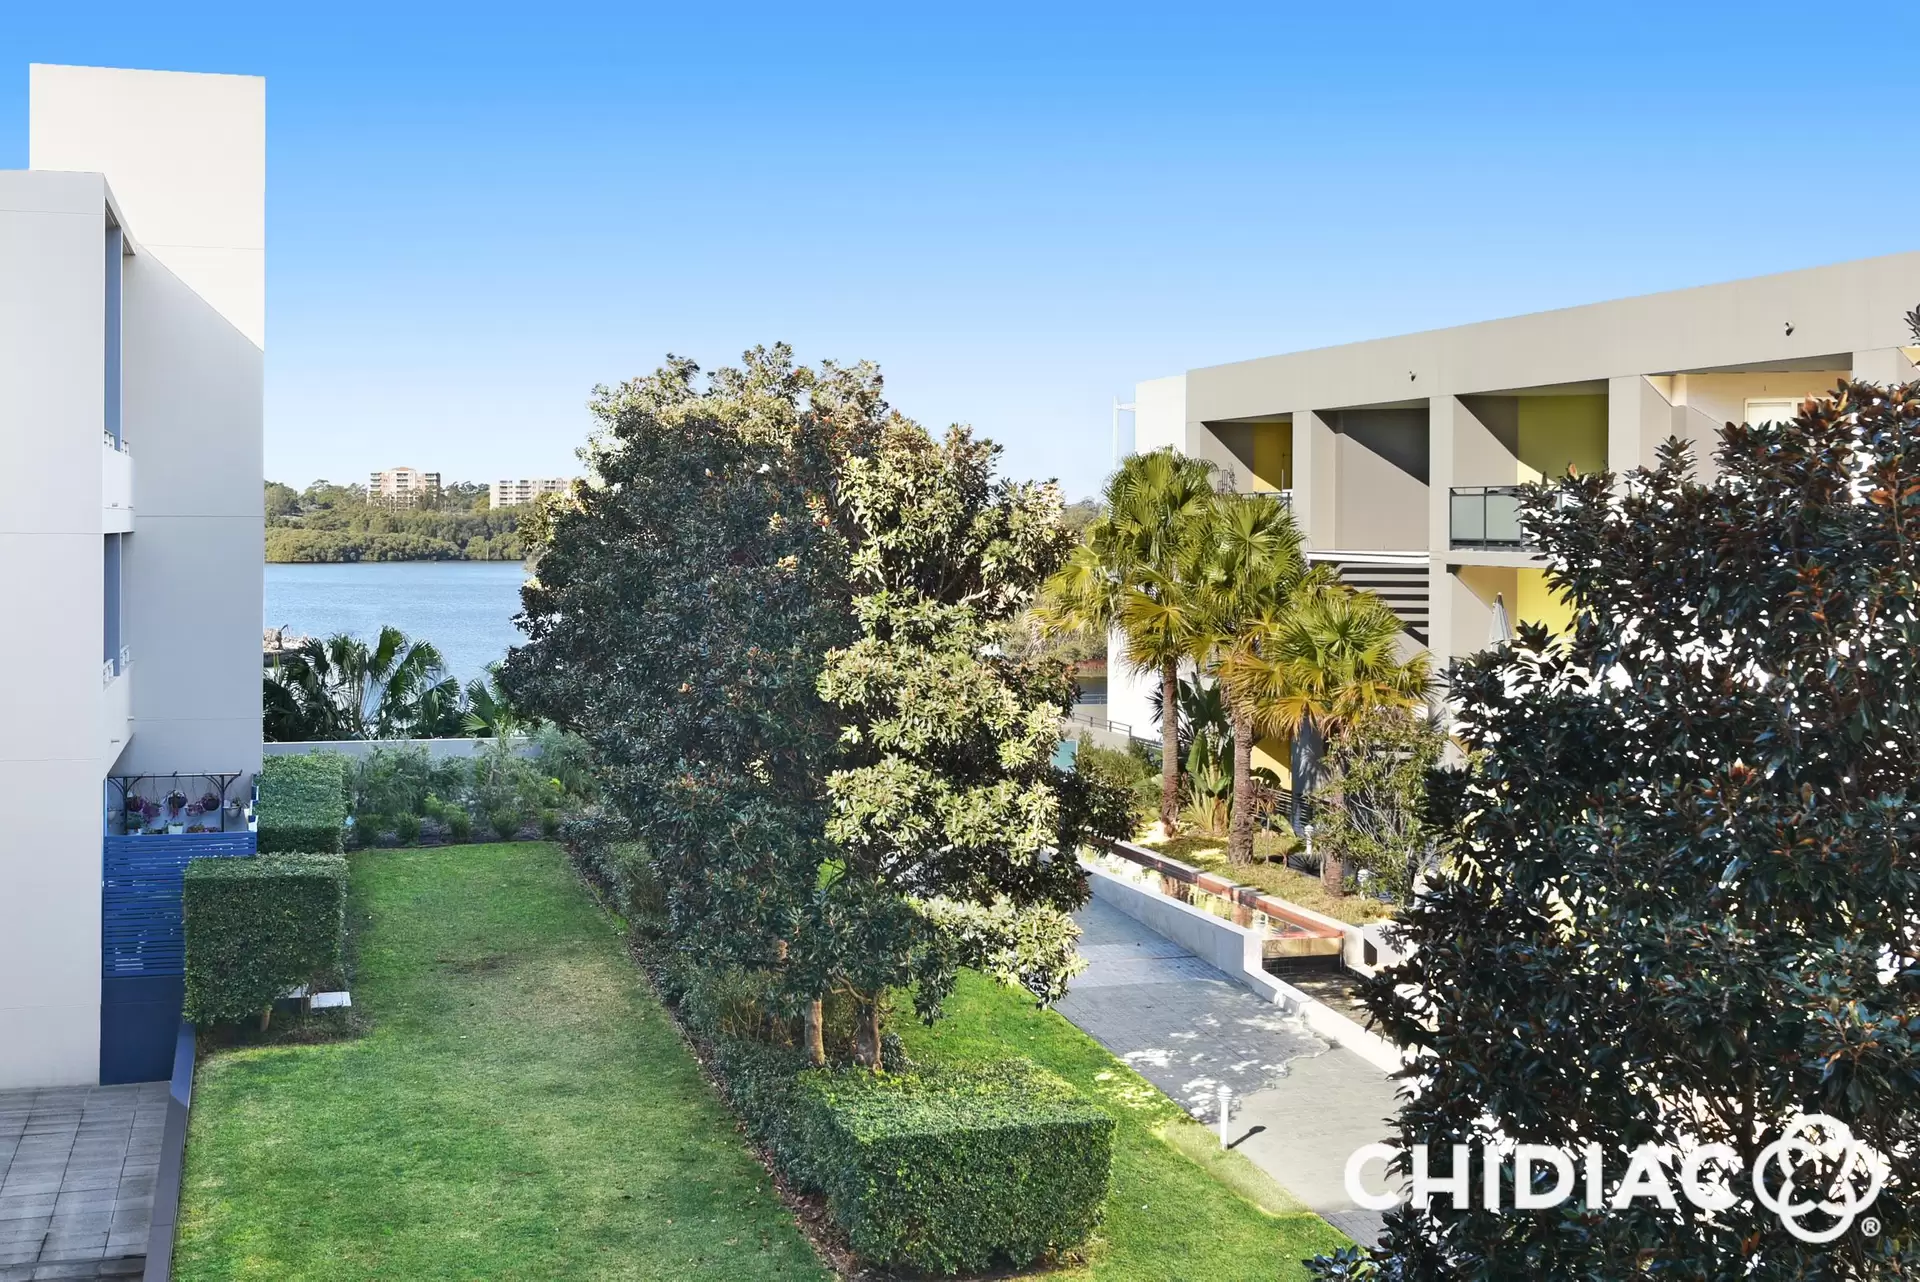 543/2 The Crescent, Wentworth Point Leased by Chidiac Realty - image 1